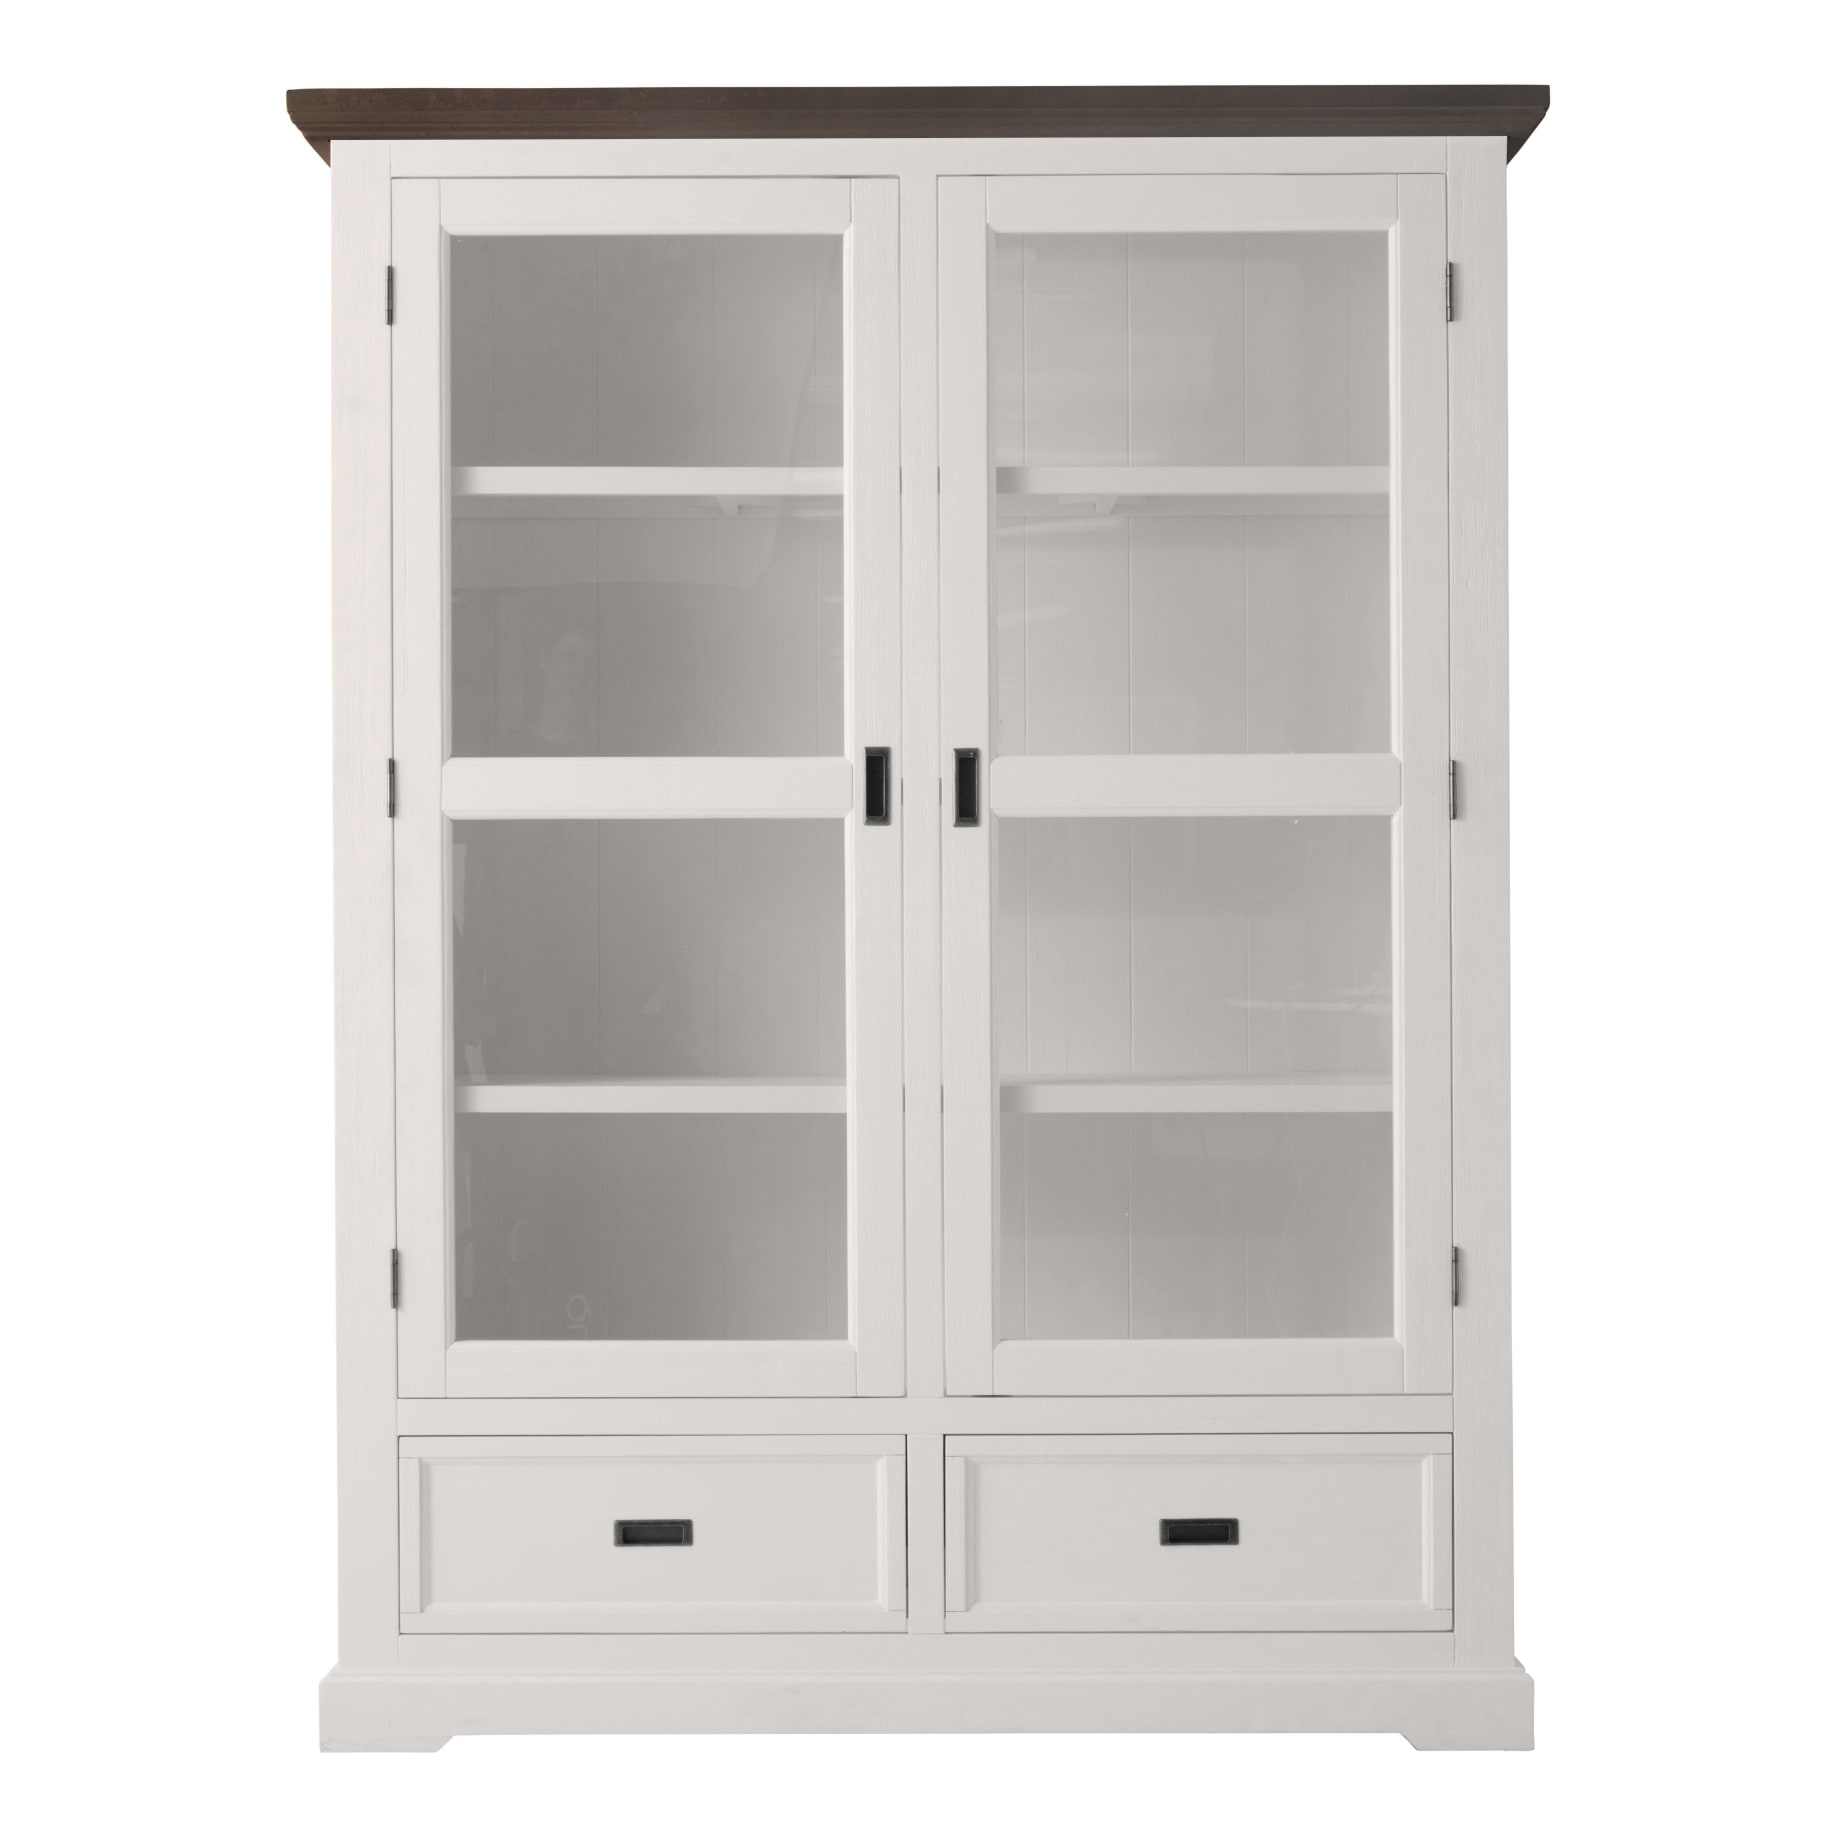 Hamptons Double Display Unit in Two Tone